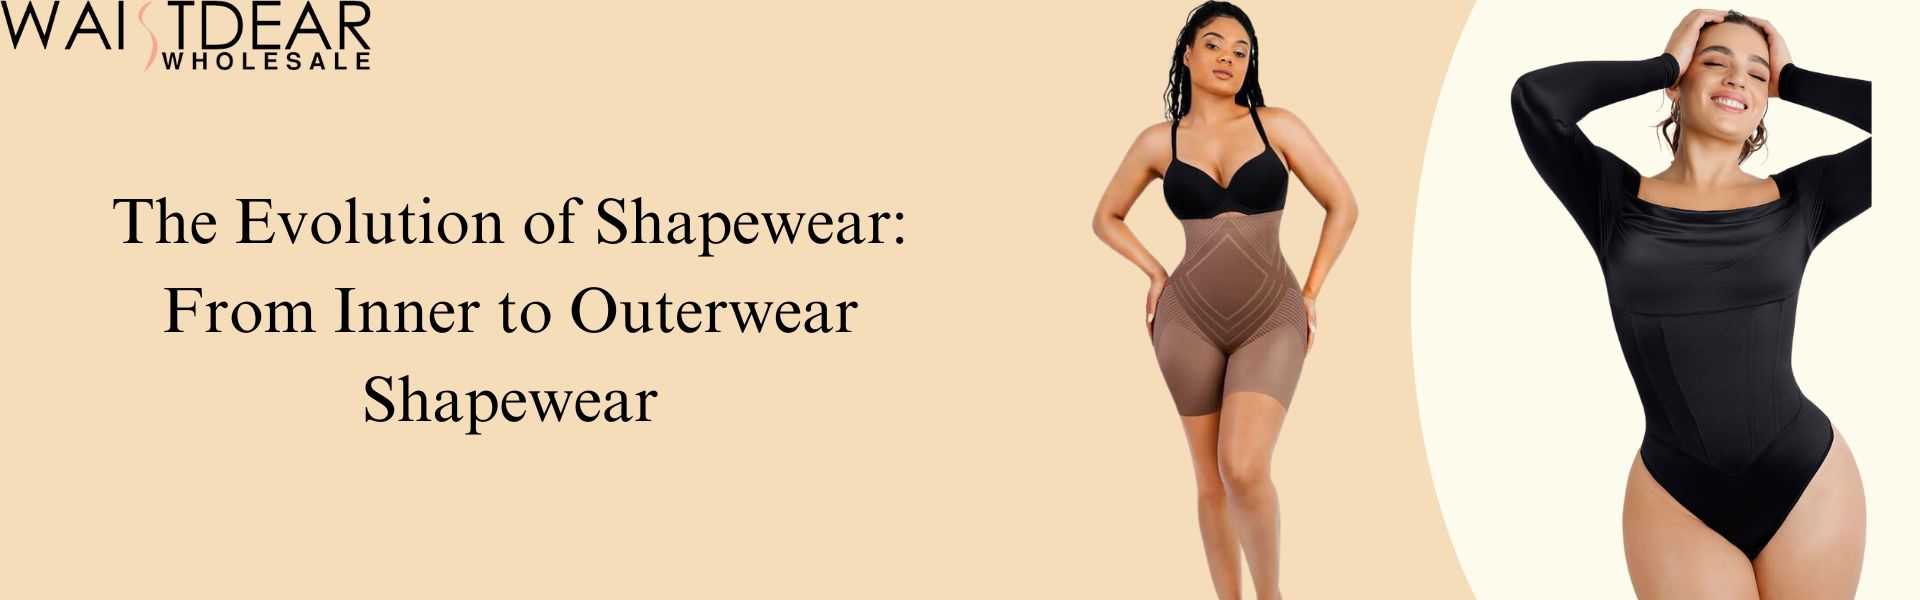 The Evolution of Shapewear: From Inner to Outerwear Shapewear